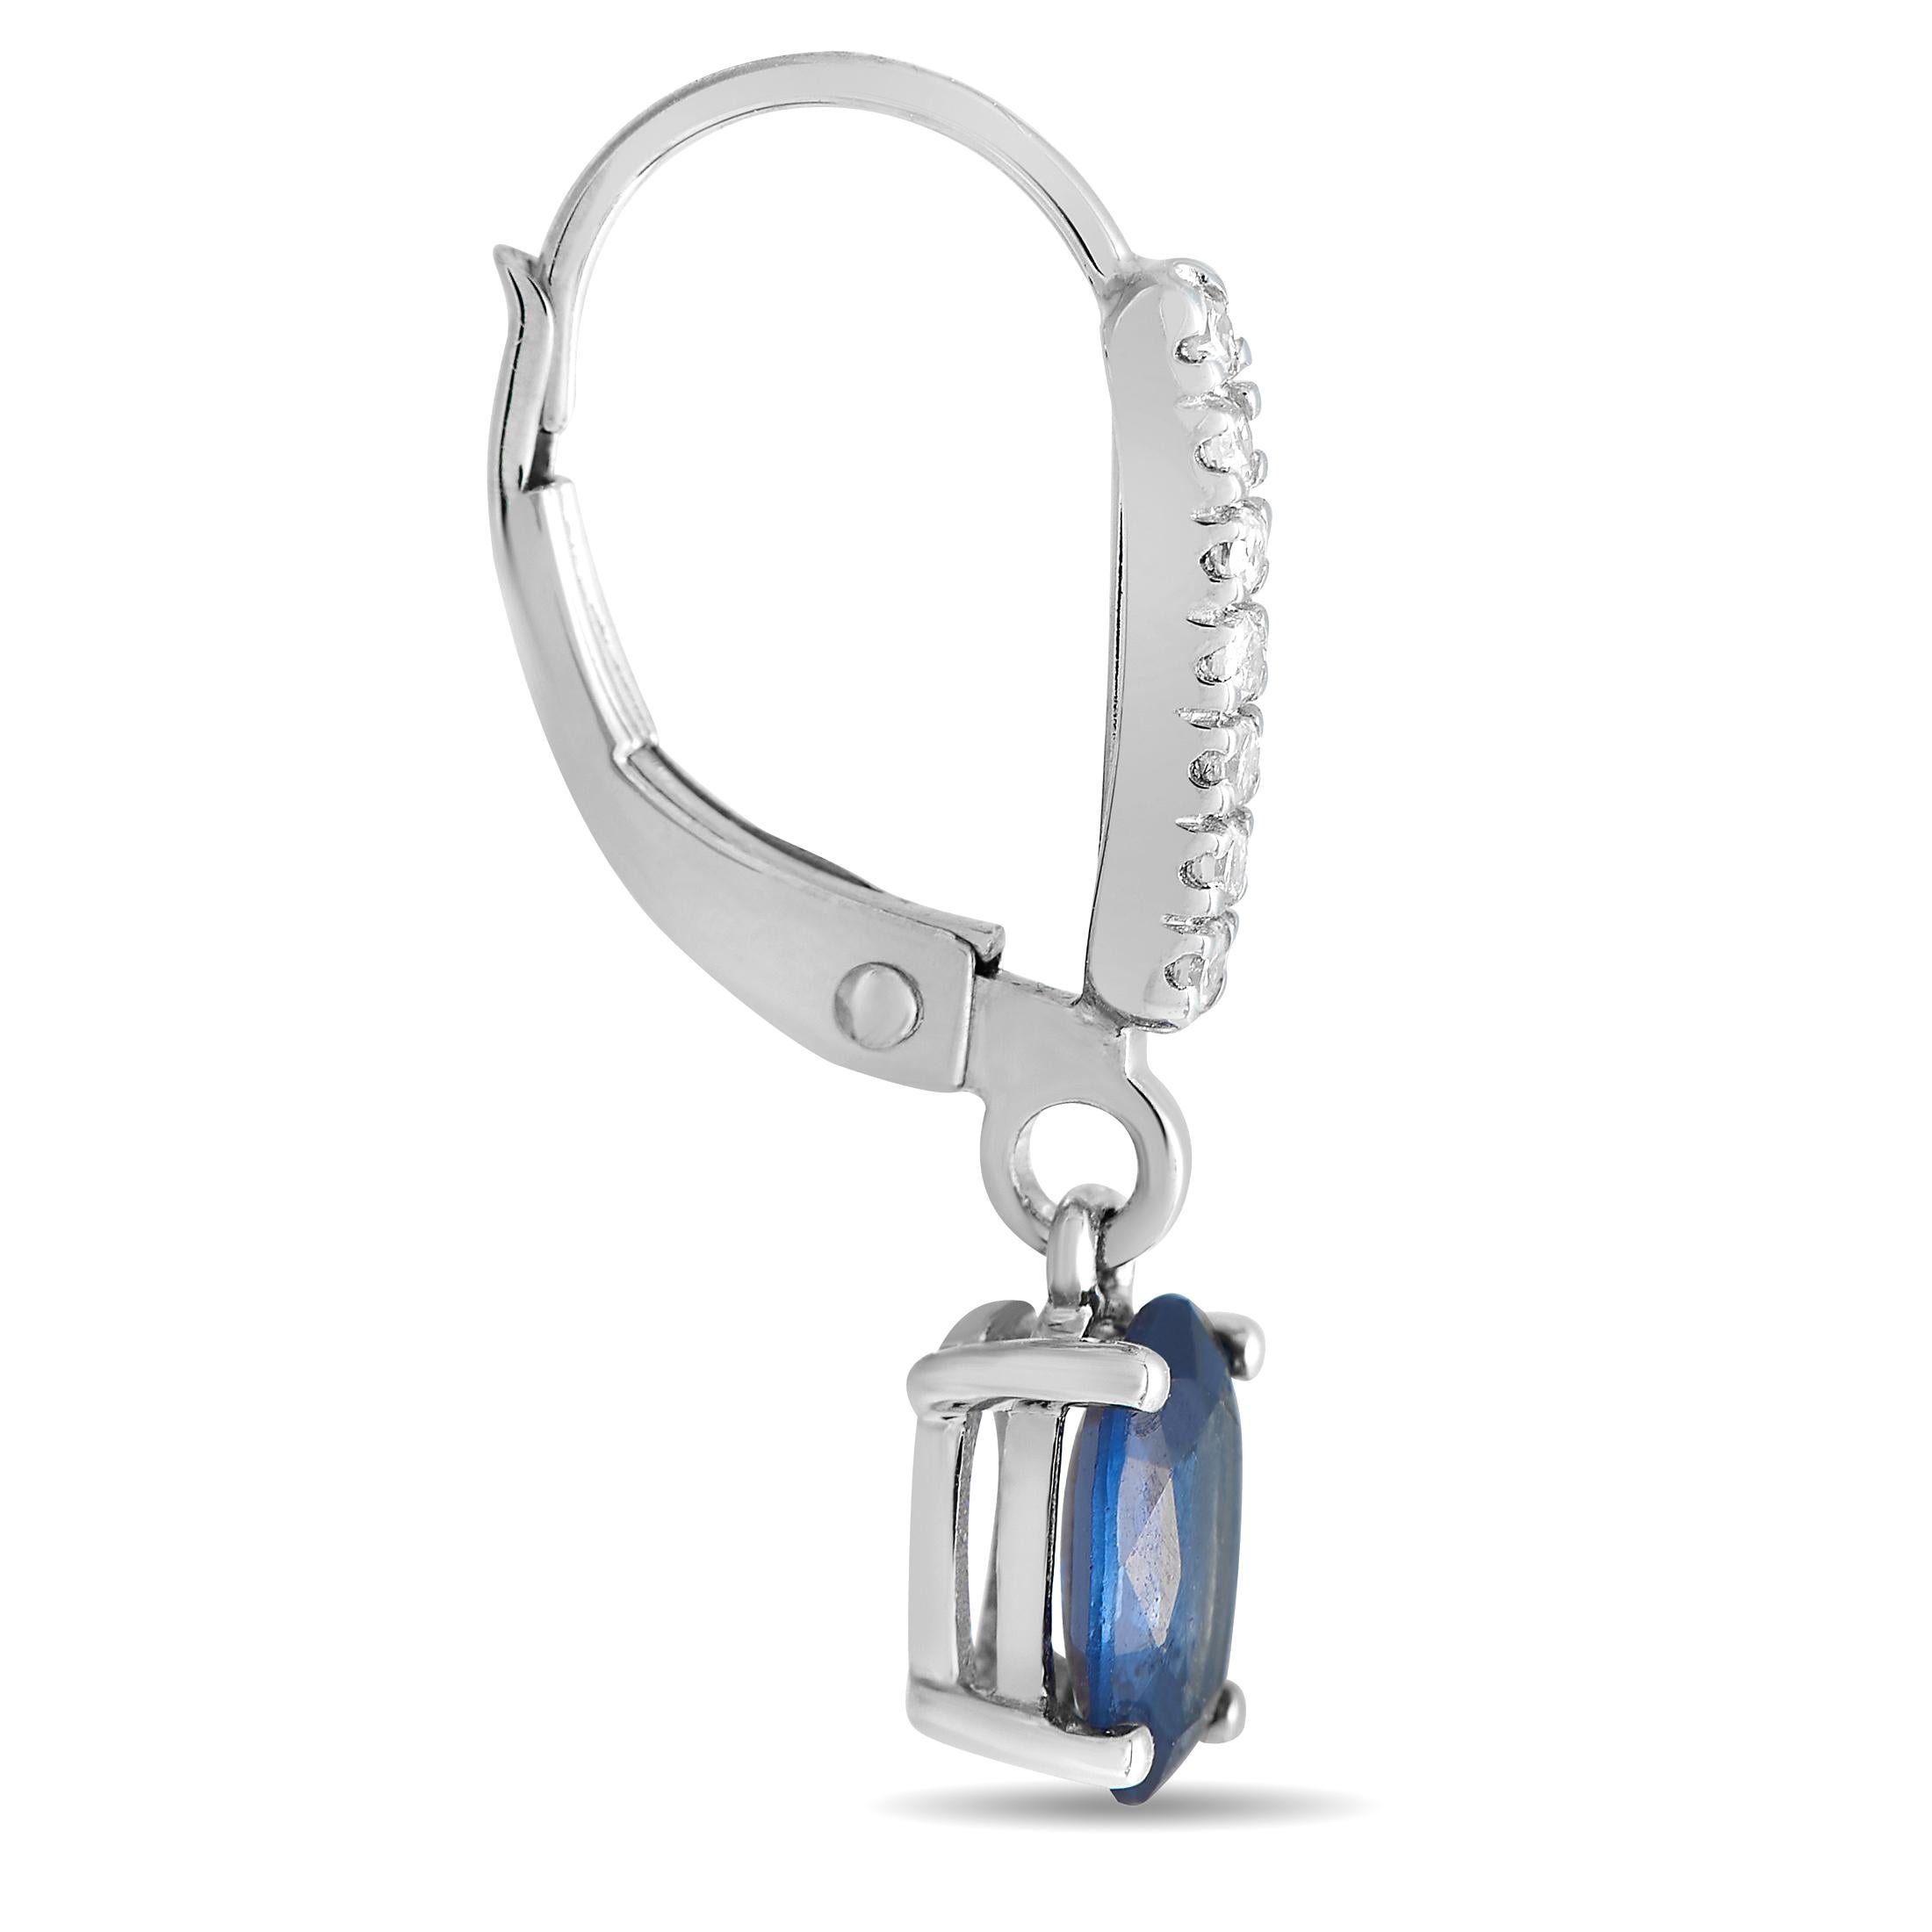 Stunning oval-shaped sapphire gemstones are elevated by sparkling diamond accents totaling 0.10 carats on these impressive luxury earrings. Simple, elegant, and understated, each one features a 14K white gold setting measuring 0.75 long by 0.15